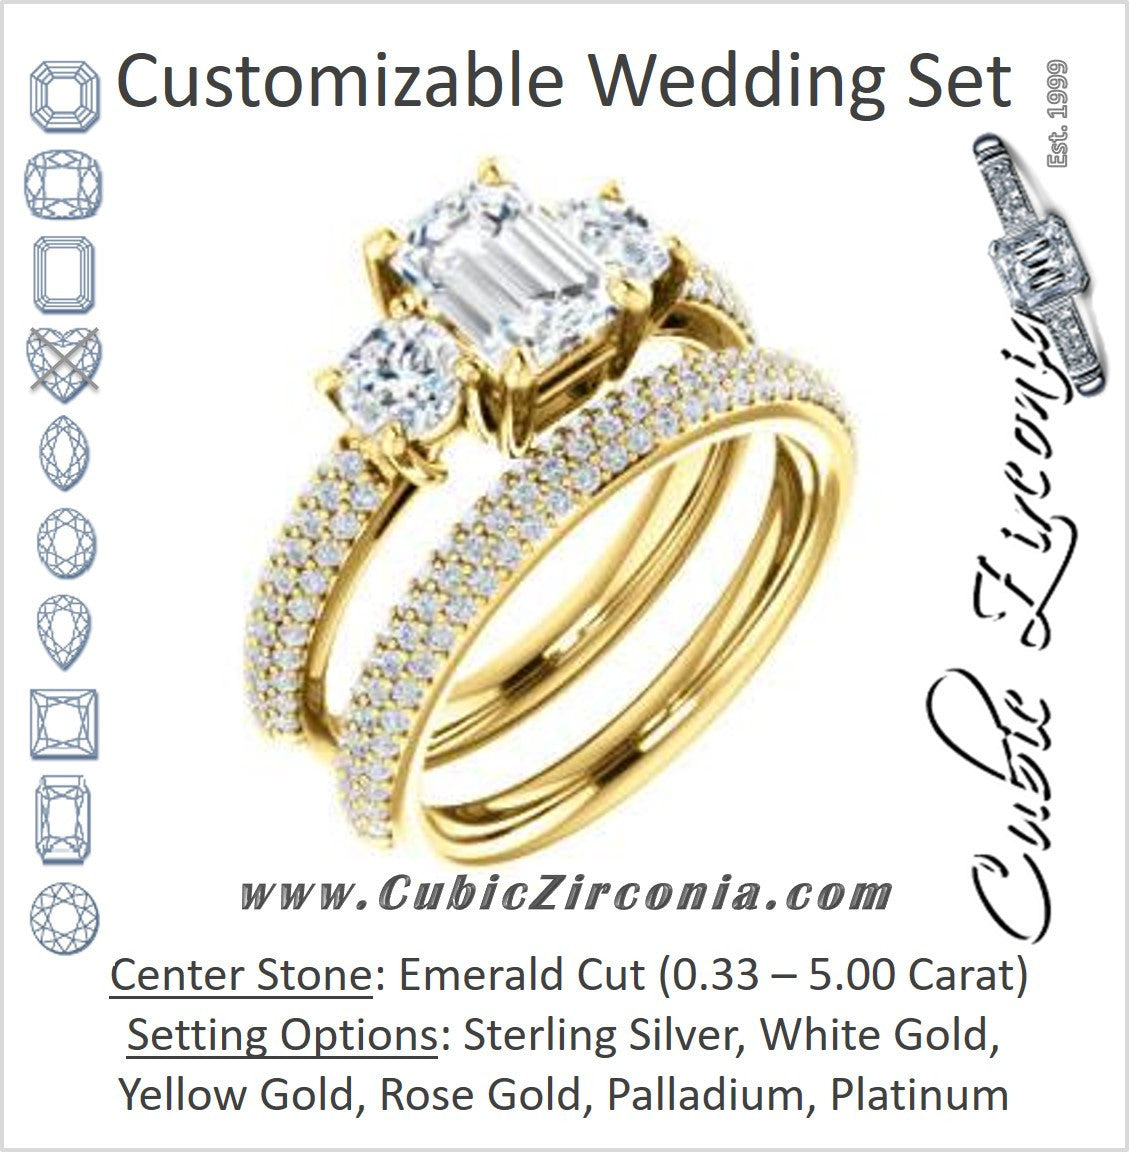 CZ Wedding Set, featuring The Zuleyma engagement ring (Customizable Enhanced 3-stone Emerald Cut Design with Triple Pavé Band)